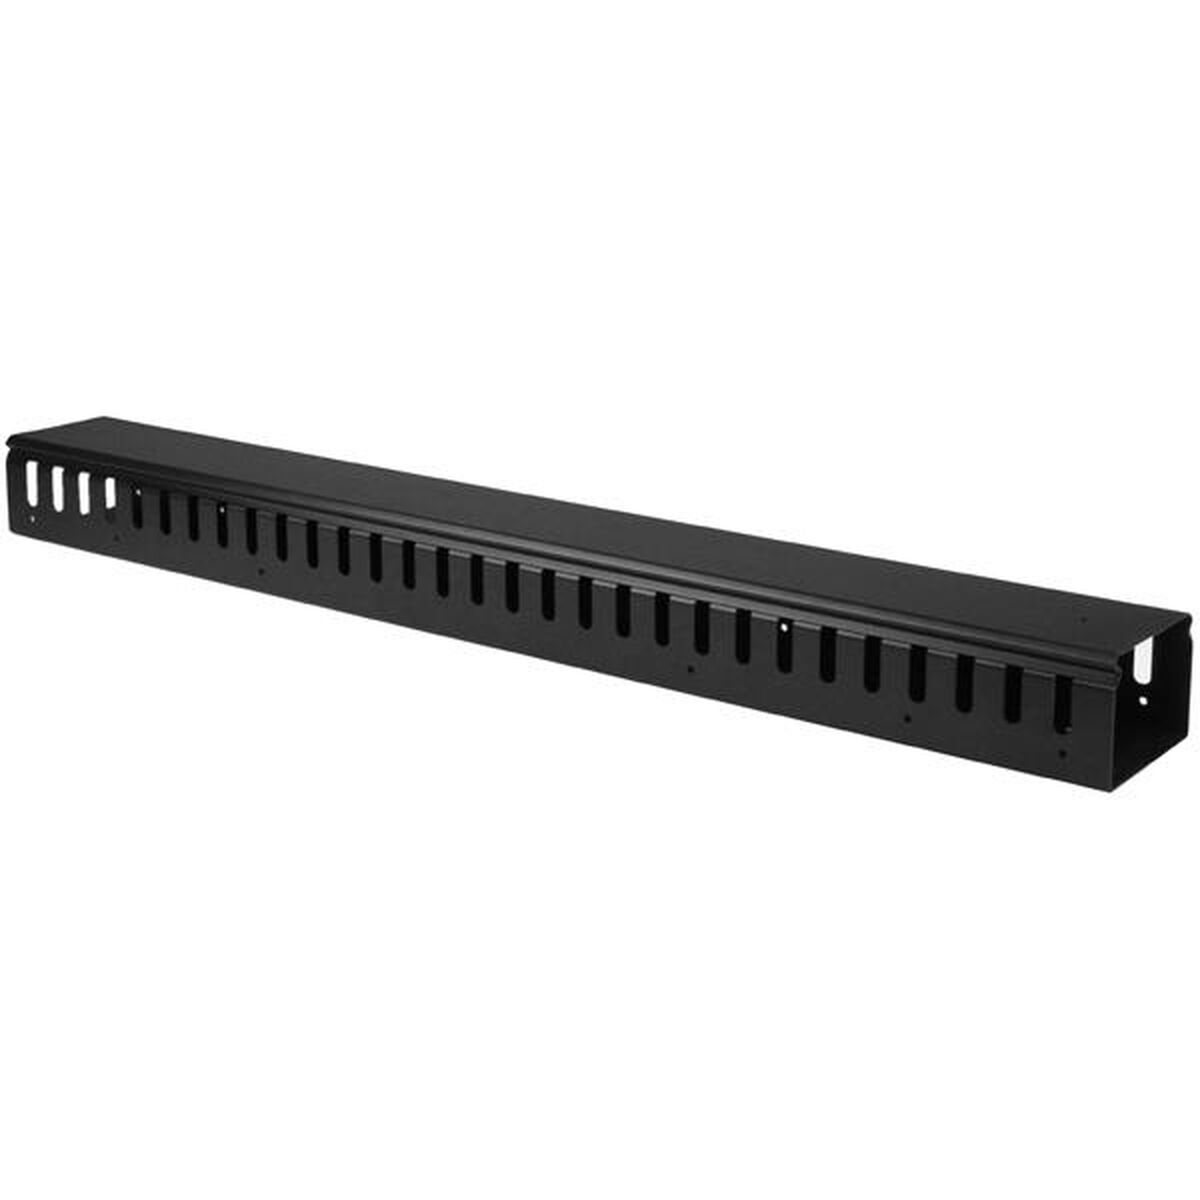 Wall-mounted Rack Cabinet Startech CMVER20UF, Startech, Computing, Accessories, wall-mounted-rack-cabinet-startech-cmver20uf, Brand_Startech, category-reference-2609, category-reference-2803, category-reference-2828, category-reference-t-19685, category-reference-t-19908, category-reference-t-21349, Condition_NEW, furniture, networks/wiring, organisation, Price_50 - 100, Teleworking, RiotNook